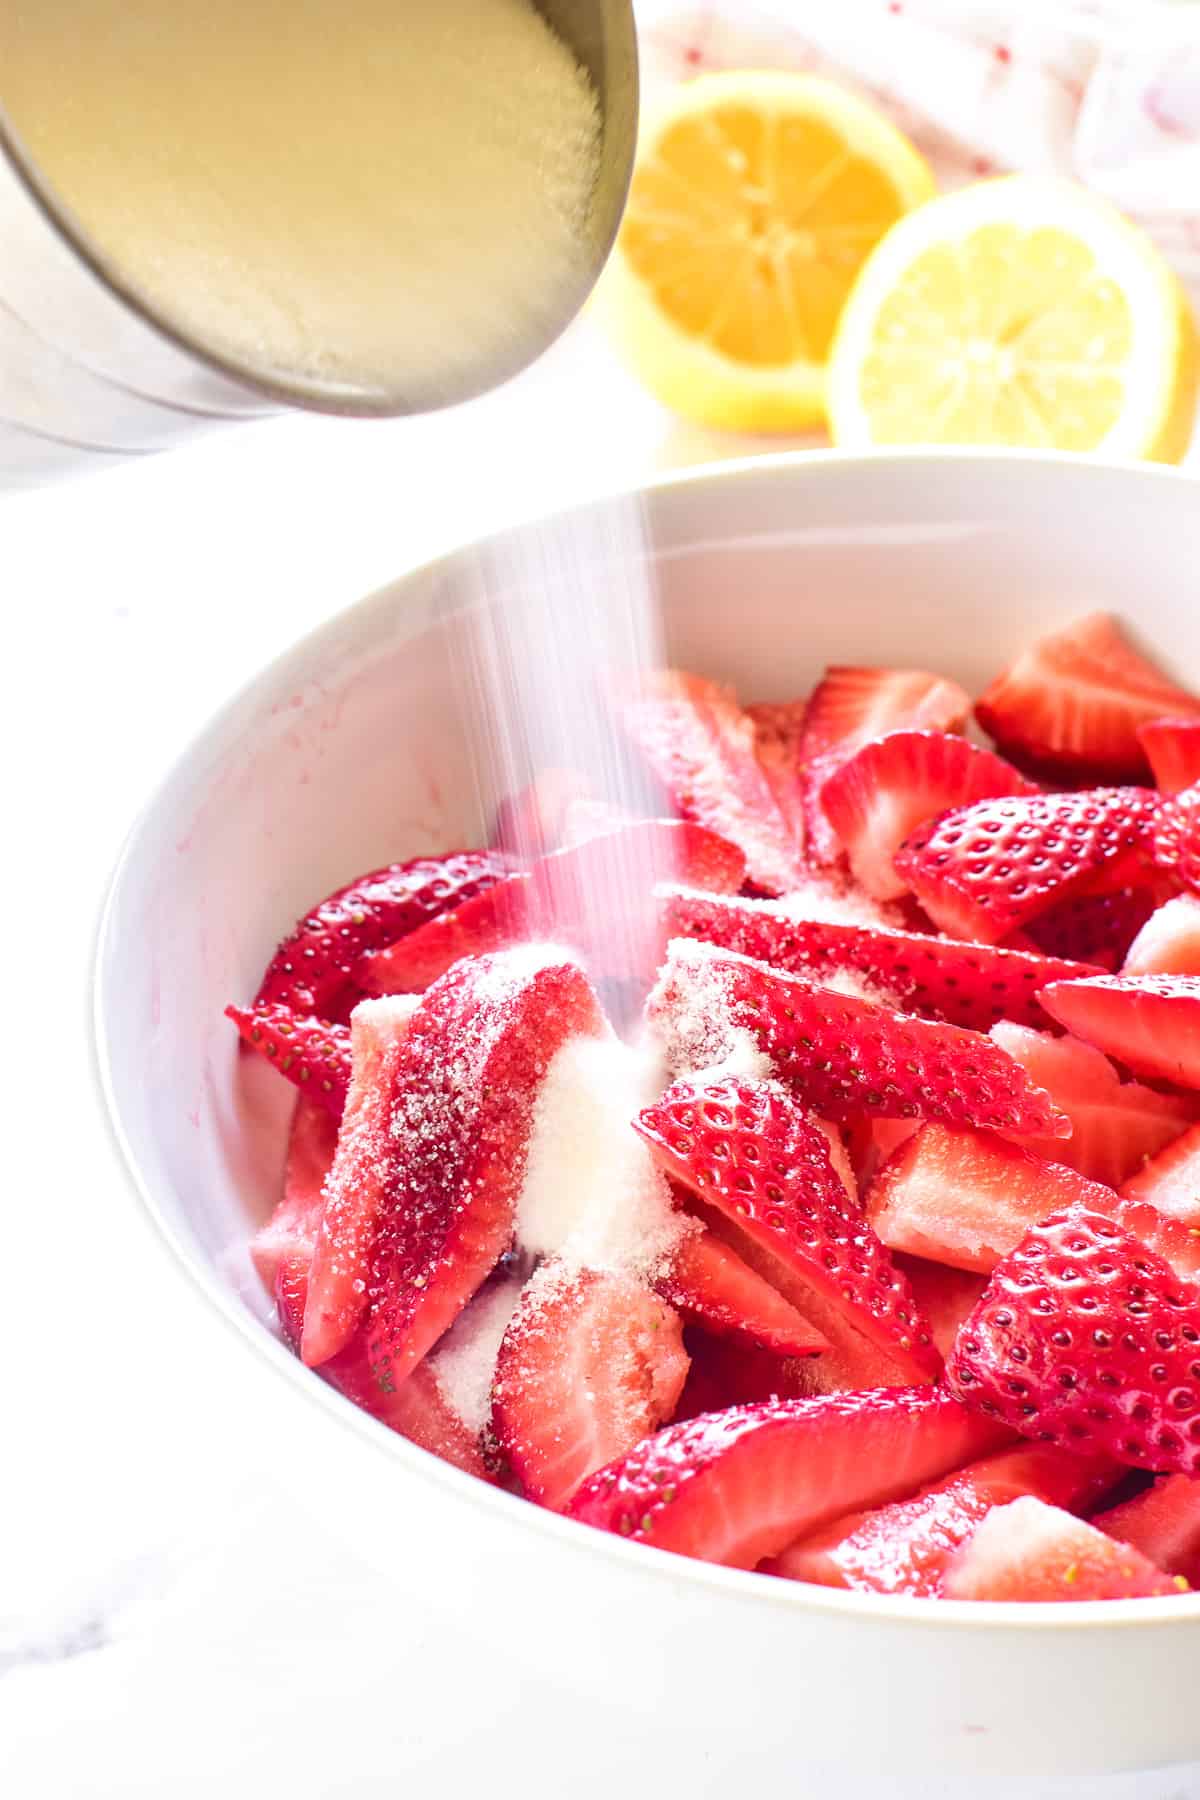 Strawberries in bowl with sugar being poured over them